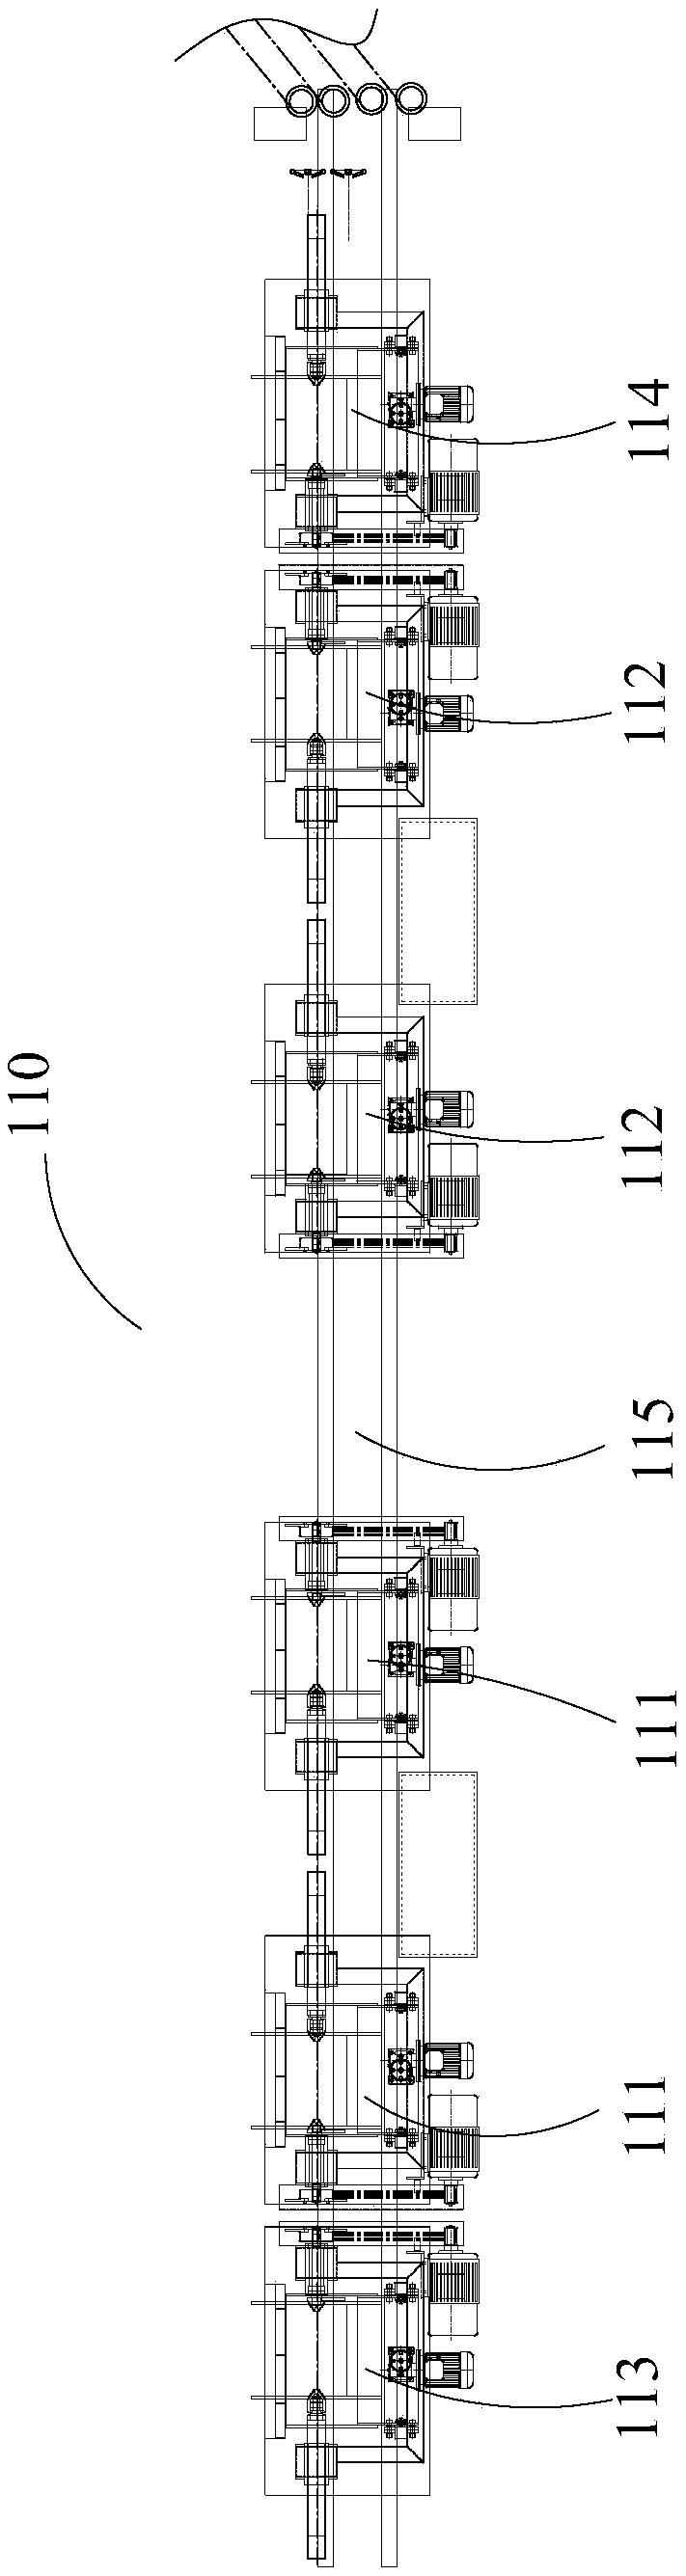 Irradiation production process device